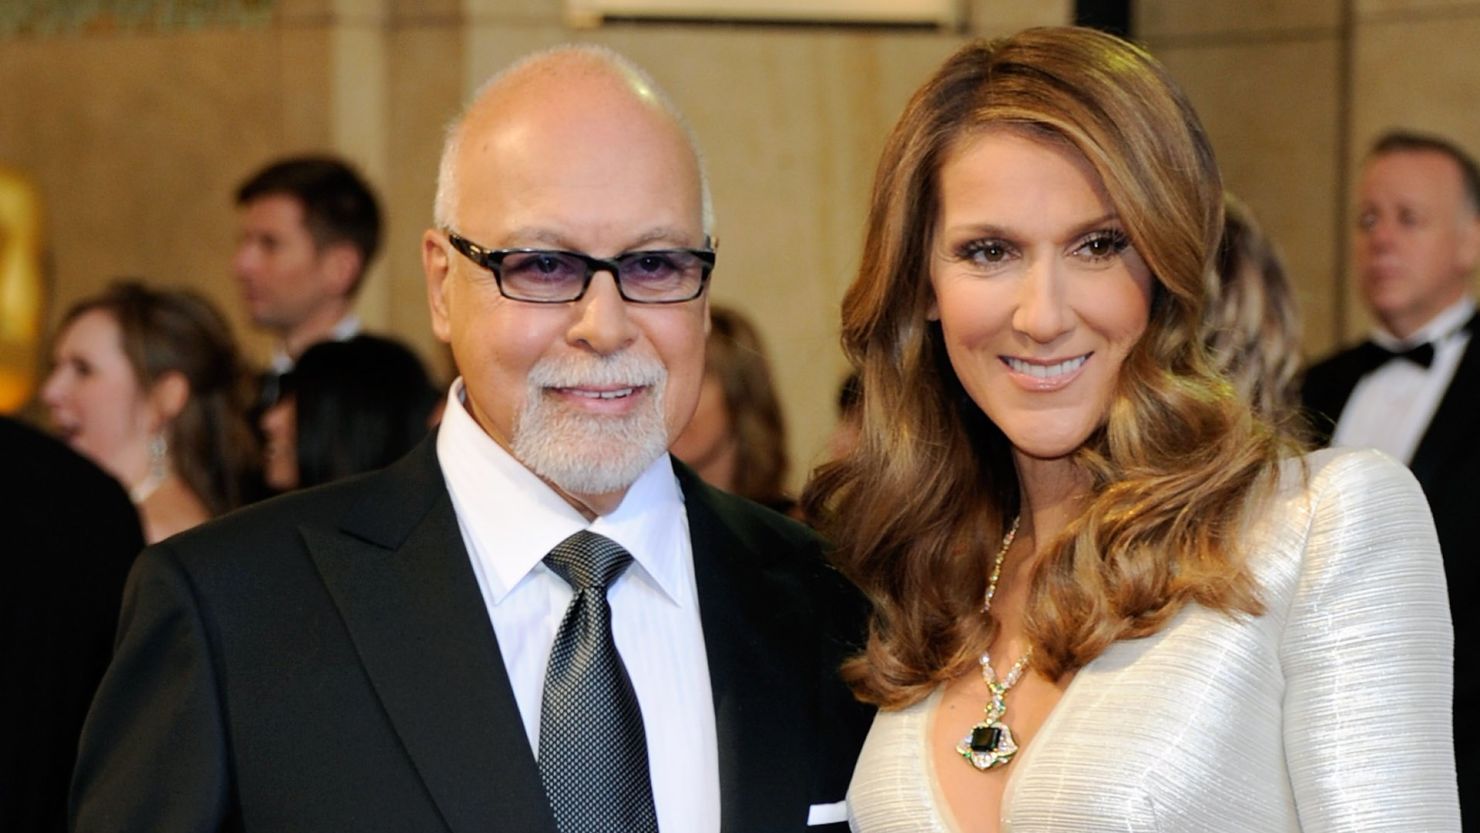 Celine Dion is shown with husband Rene Angelil at the Oscars in 2011. The couple and their three sons live in Las Vegas.